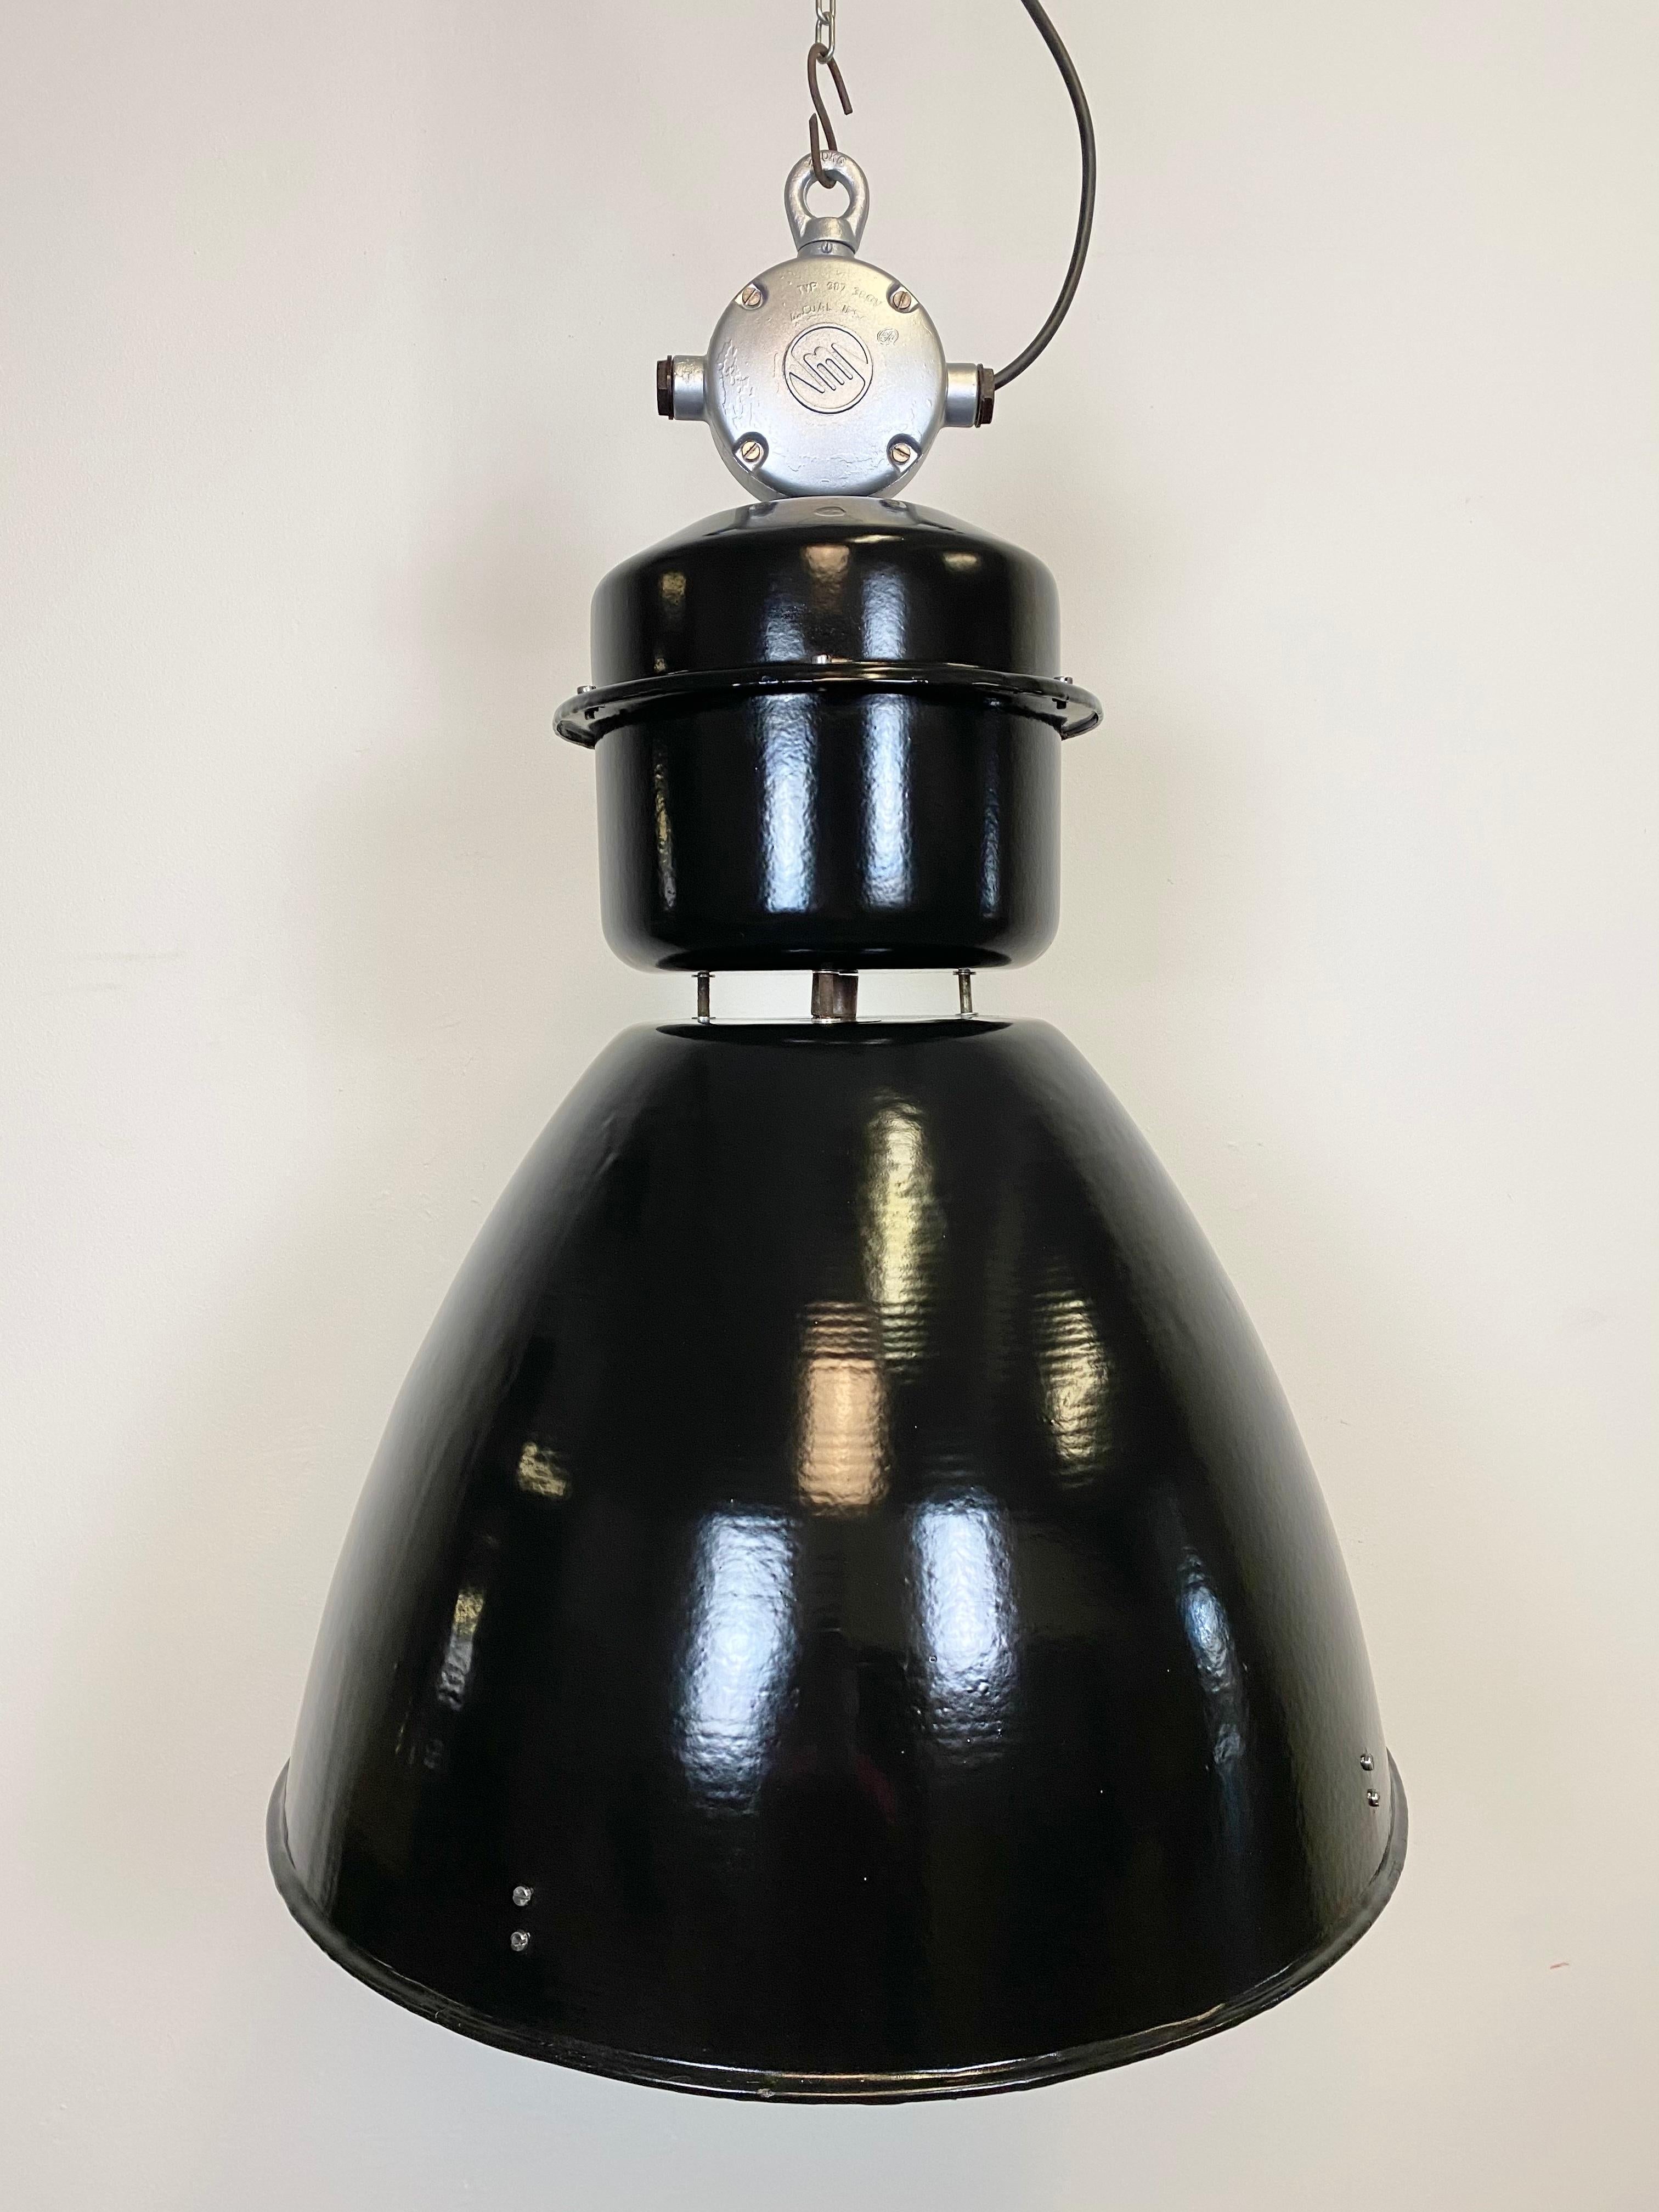 This black painted industrial pendant light was designed in the 1960s and produced by Elektrosvit in the former Czechoslovakia. It features a cast aluminium top, a black exterior and a white enamel interior.
New porcelain socket for requires